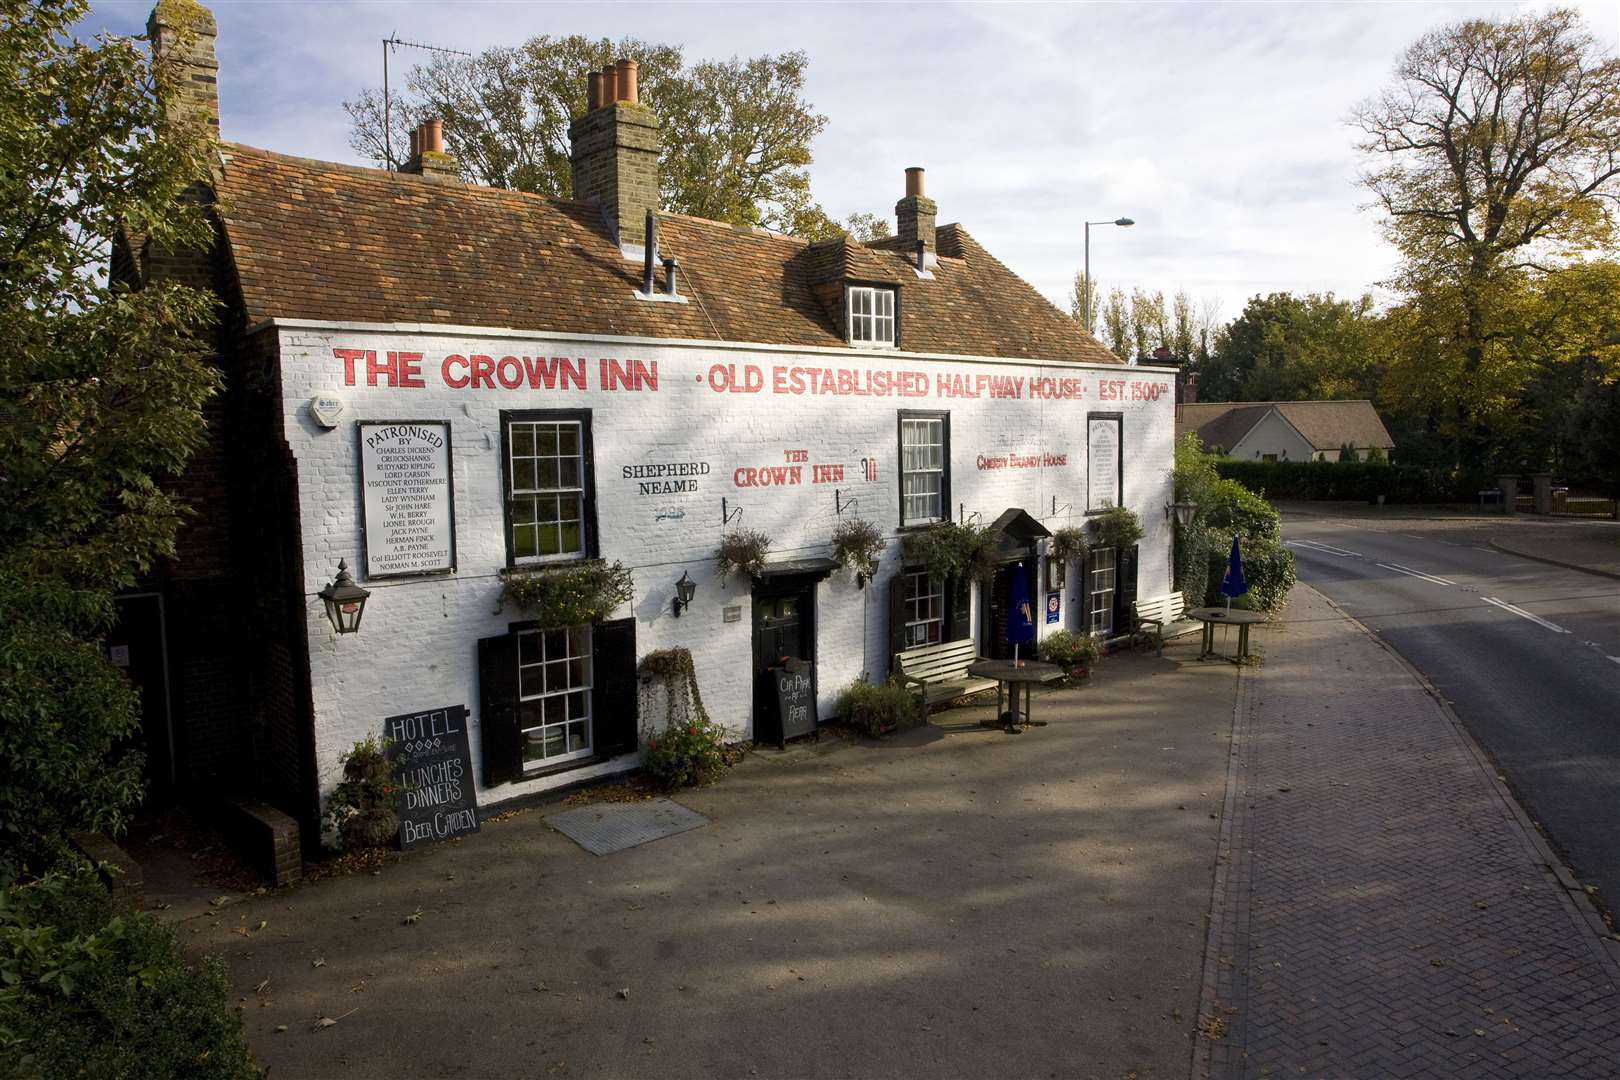 The No.1 pub on my list - the Crown Inn at Sarre